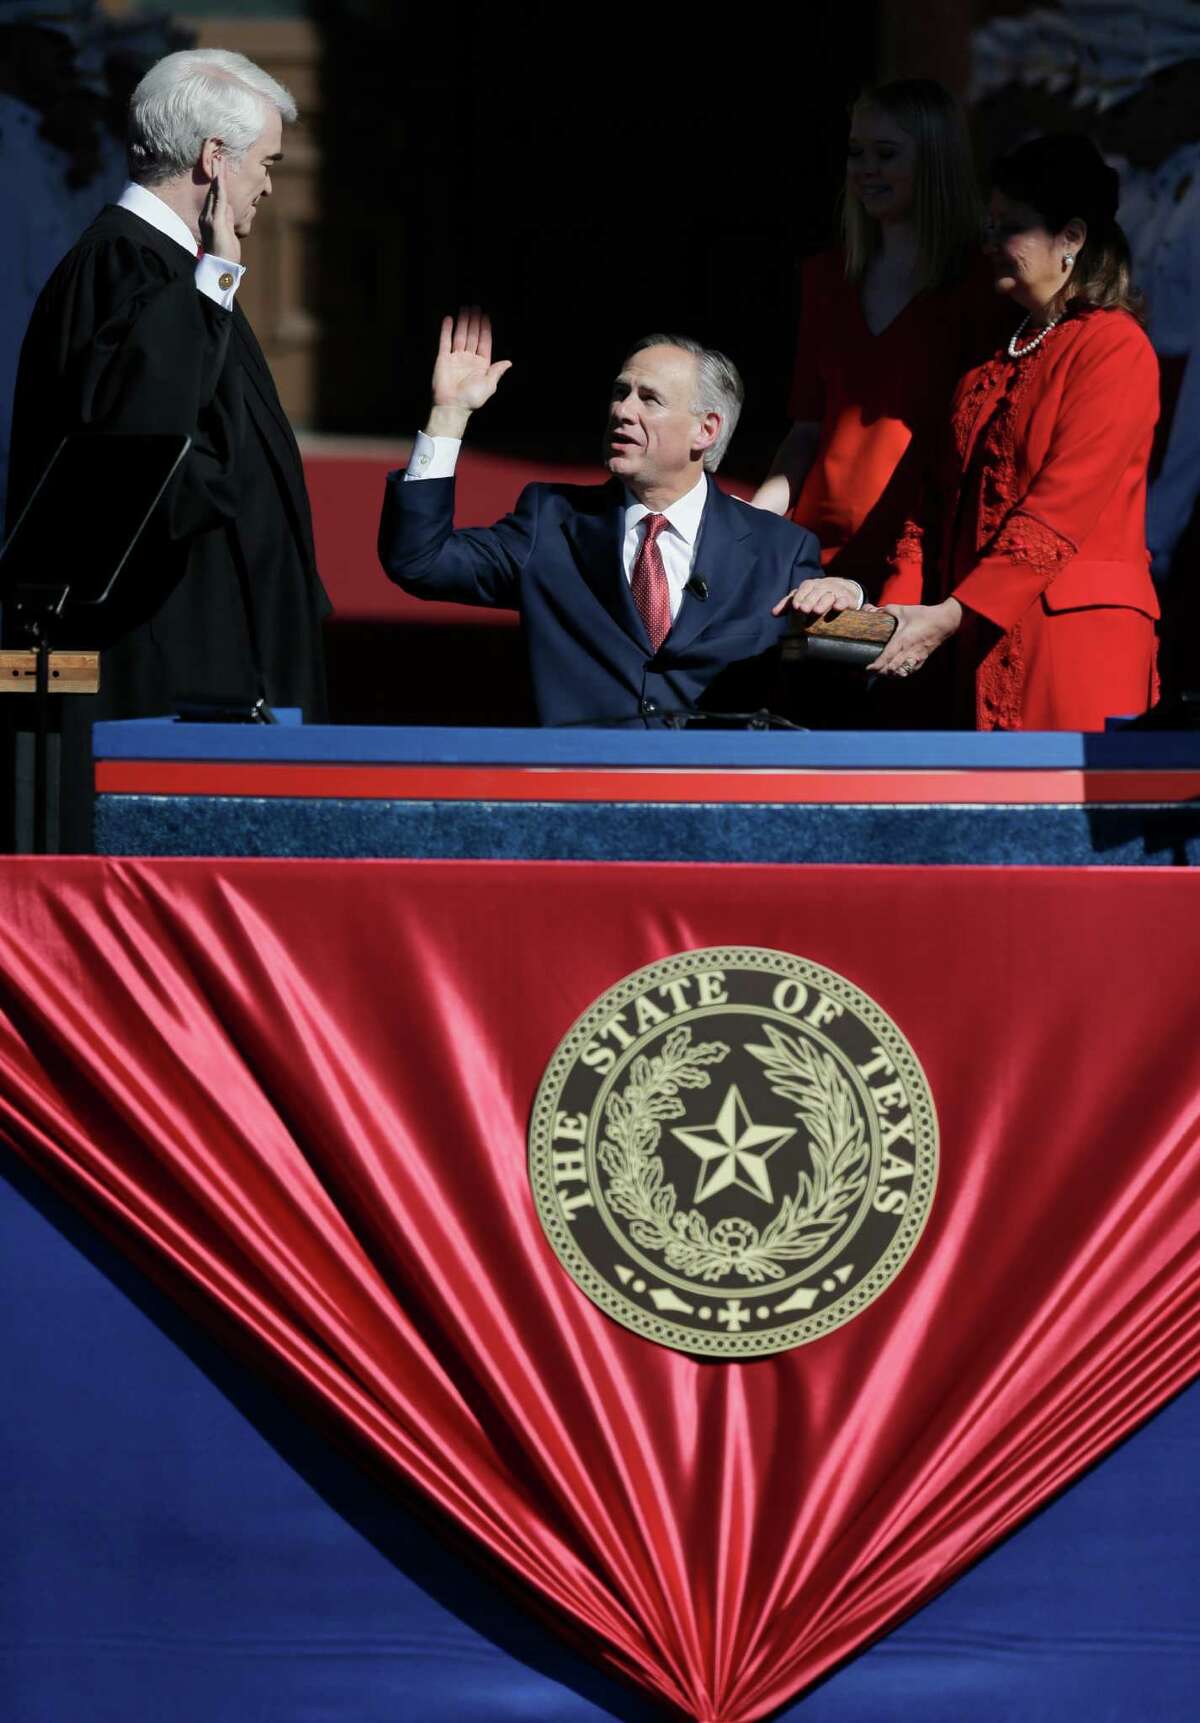 Incoming Texas Gov. Greg Abbott, center, is sworn in to office by Chief Justice Nathan Hecht, left, as Abbott's wife, Cecilia, stands at right, Tuesday, Jan. 20, 2015, in Austin, Texas. Abbott is the first Texas governor to use a wheelchair. (AP Photo/Eric Gay)